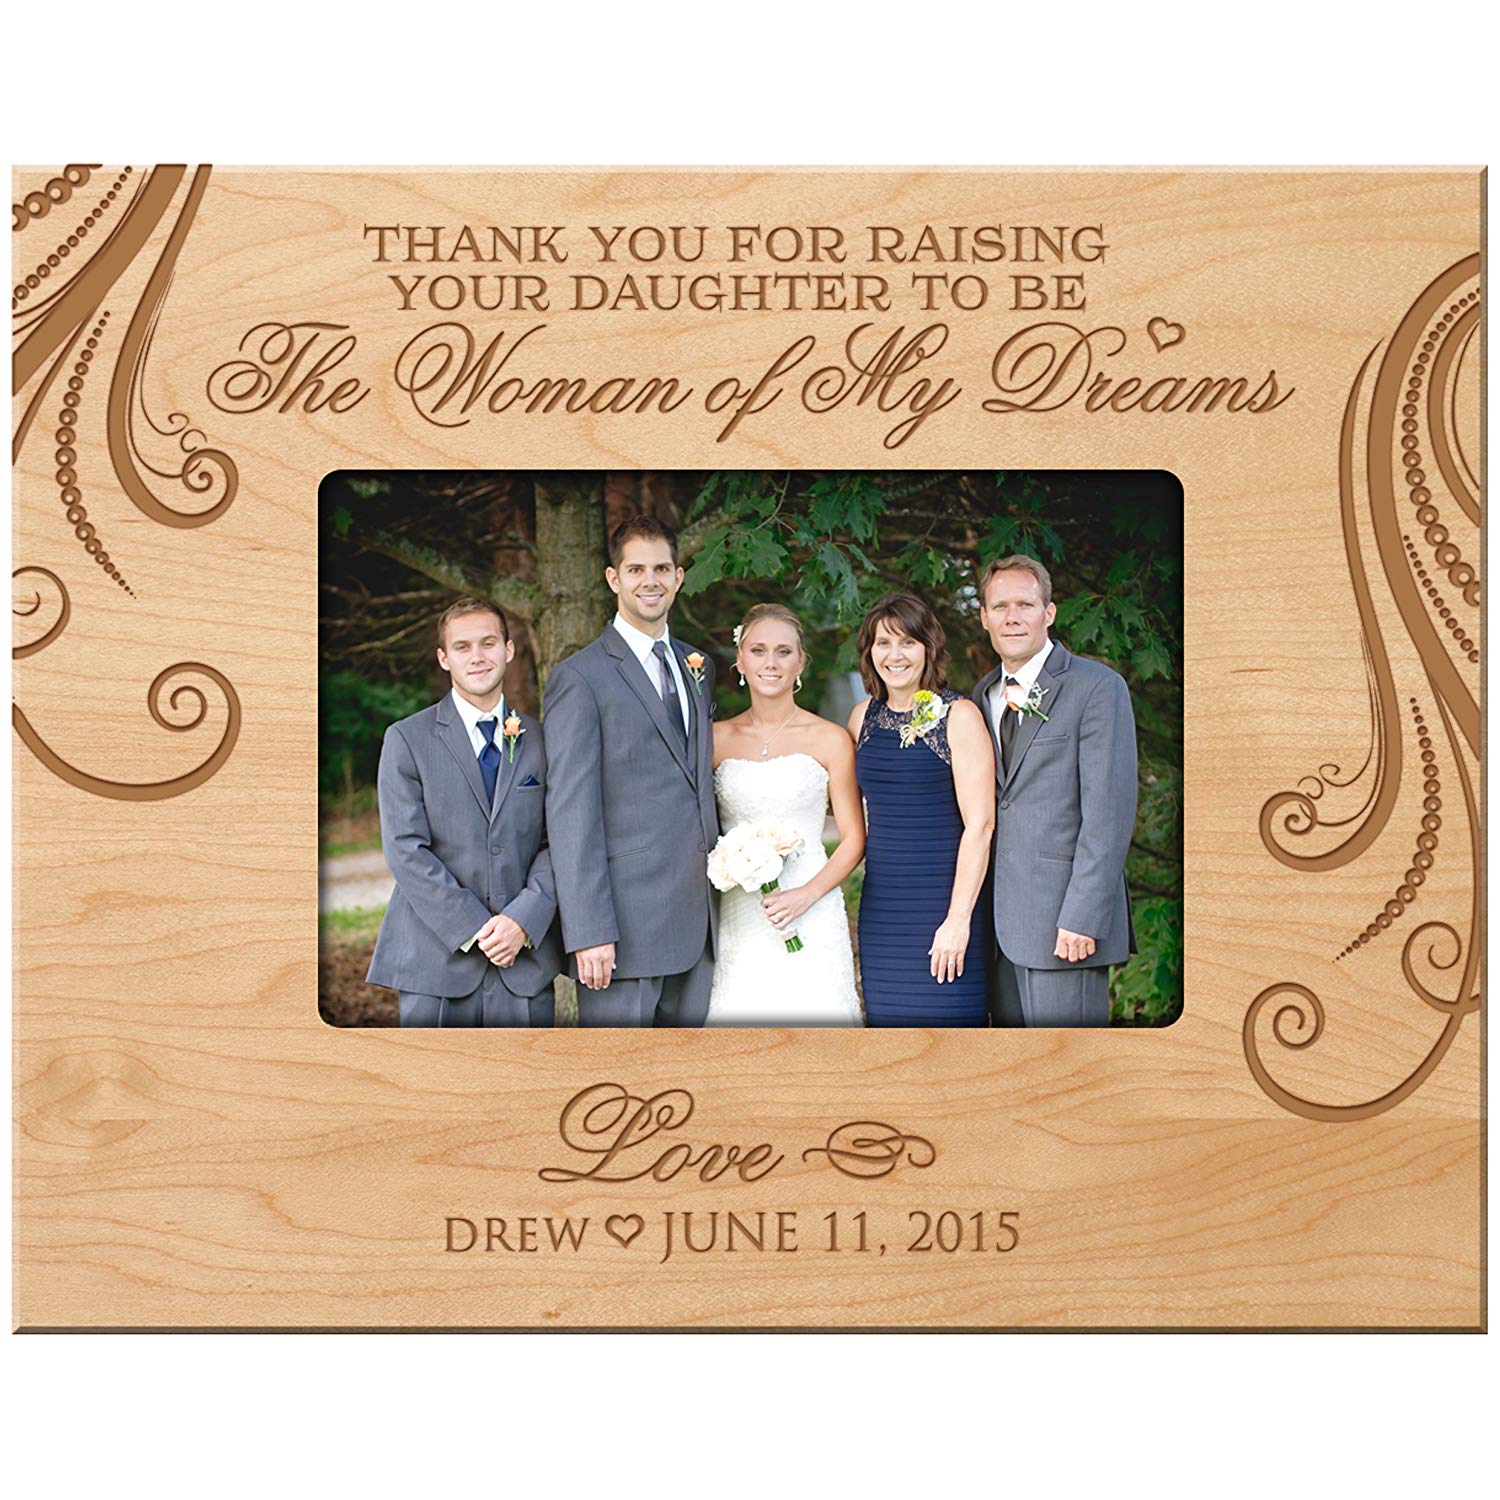 Personalized Parent Wedding Frame Gift - The Women Of My Dreams - LifeSong Milestones